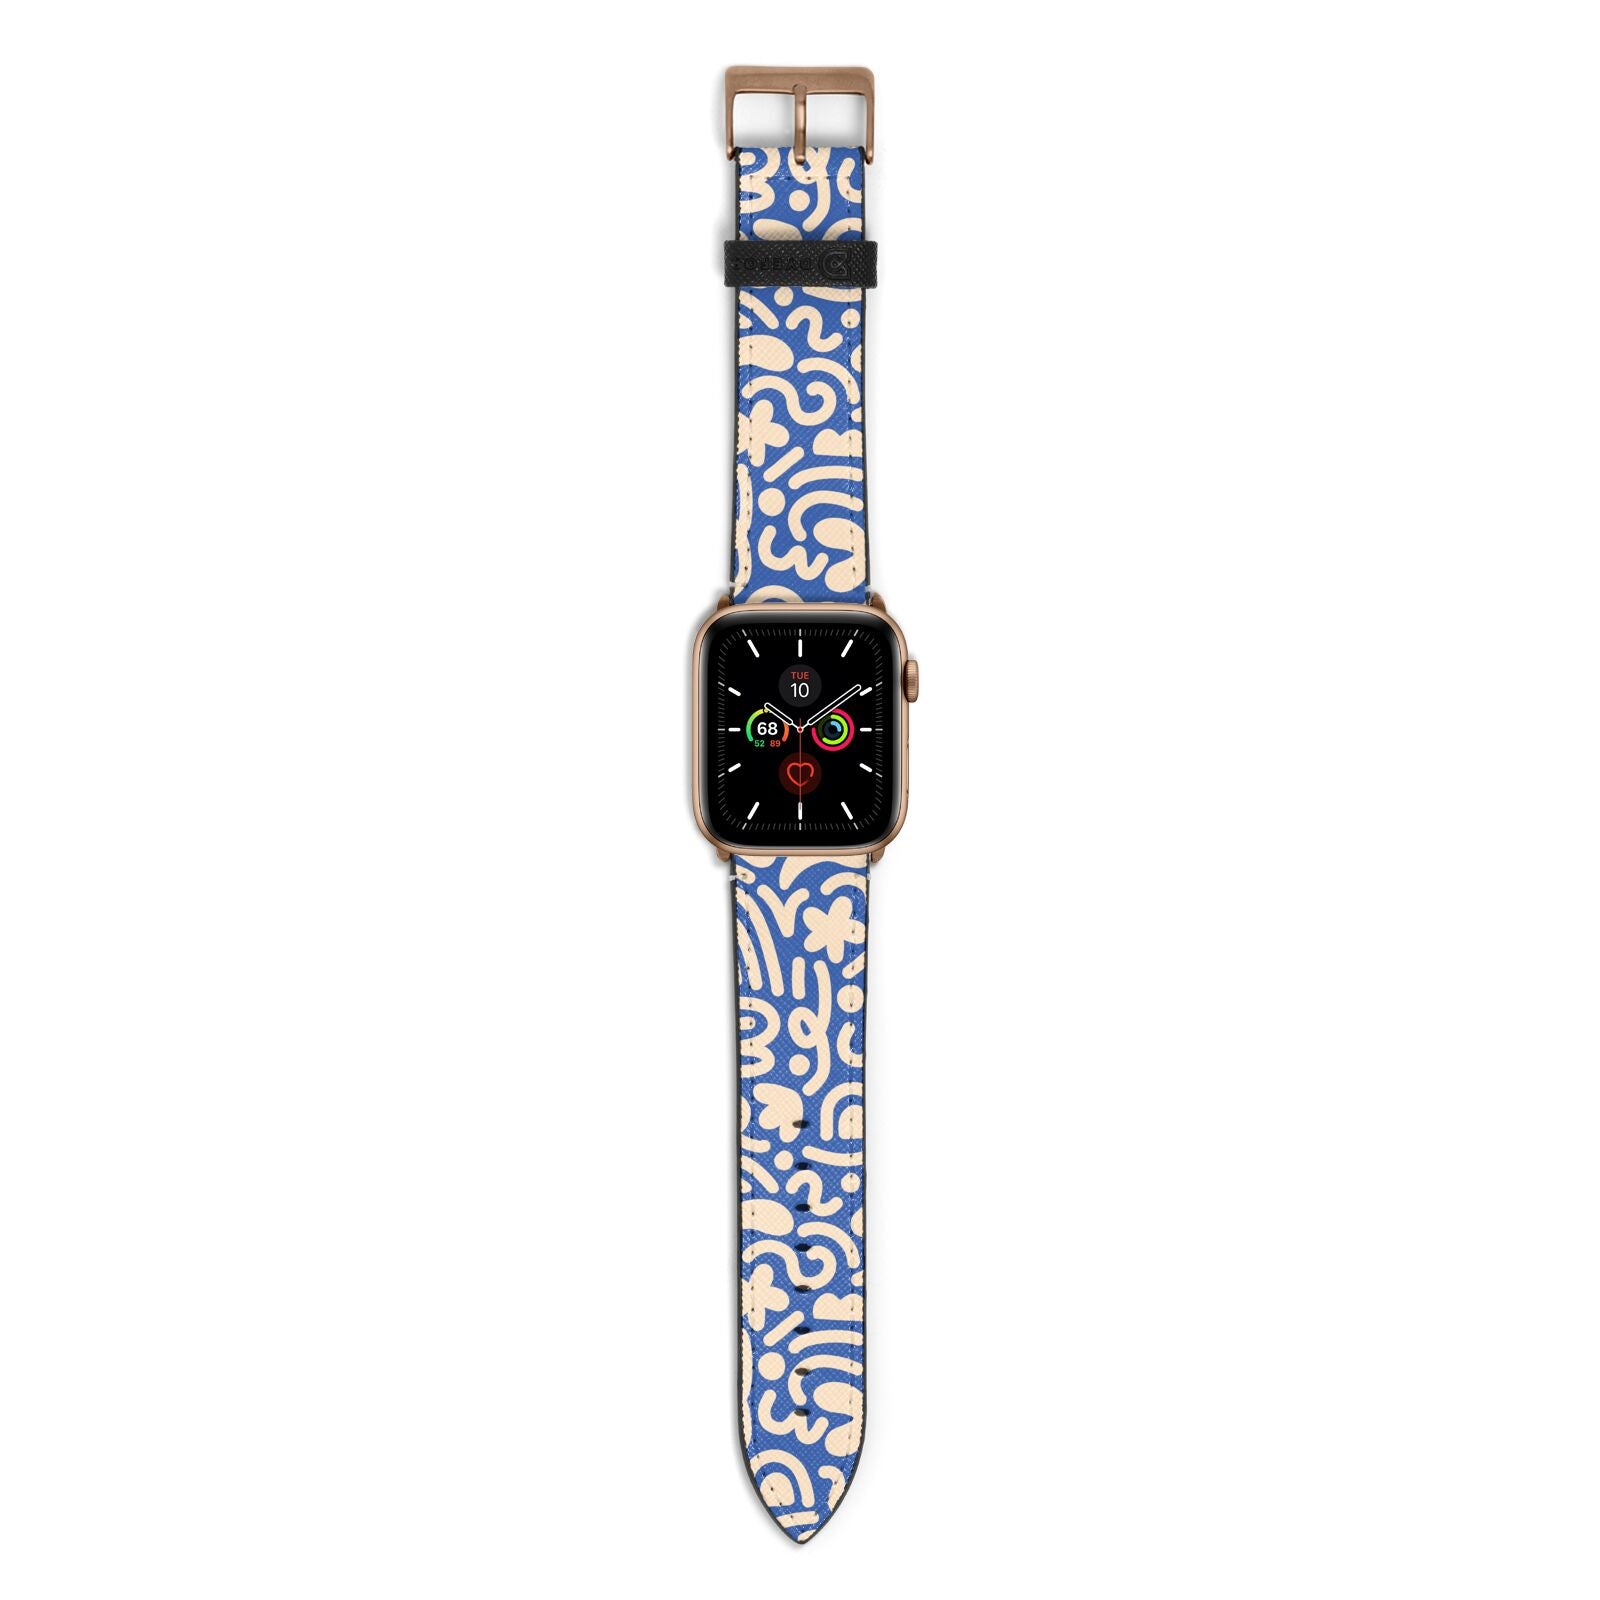 Abstract Apple Watch Strap with Gold Hardware